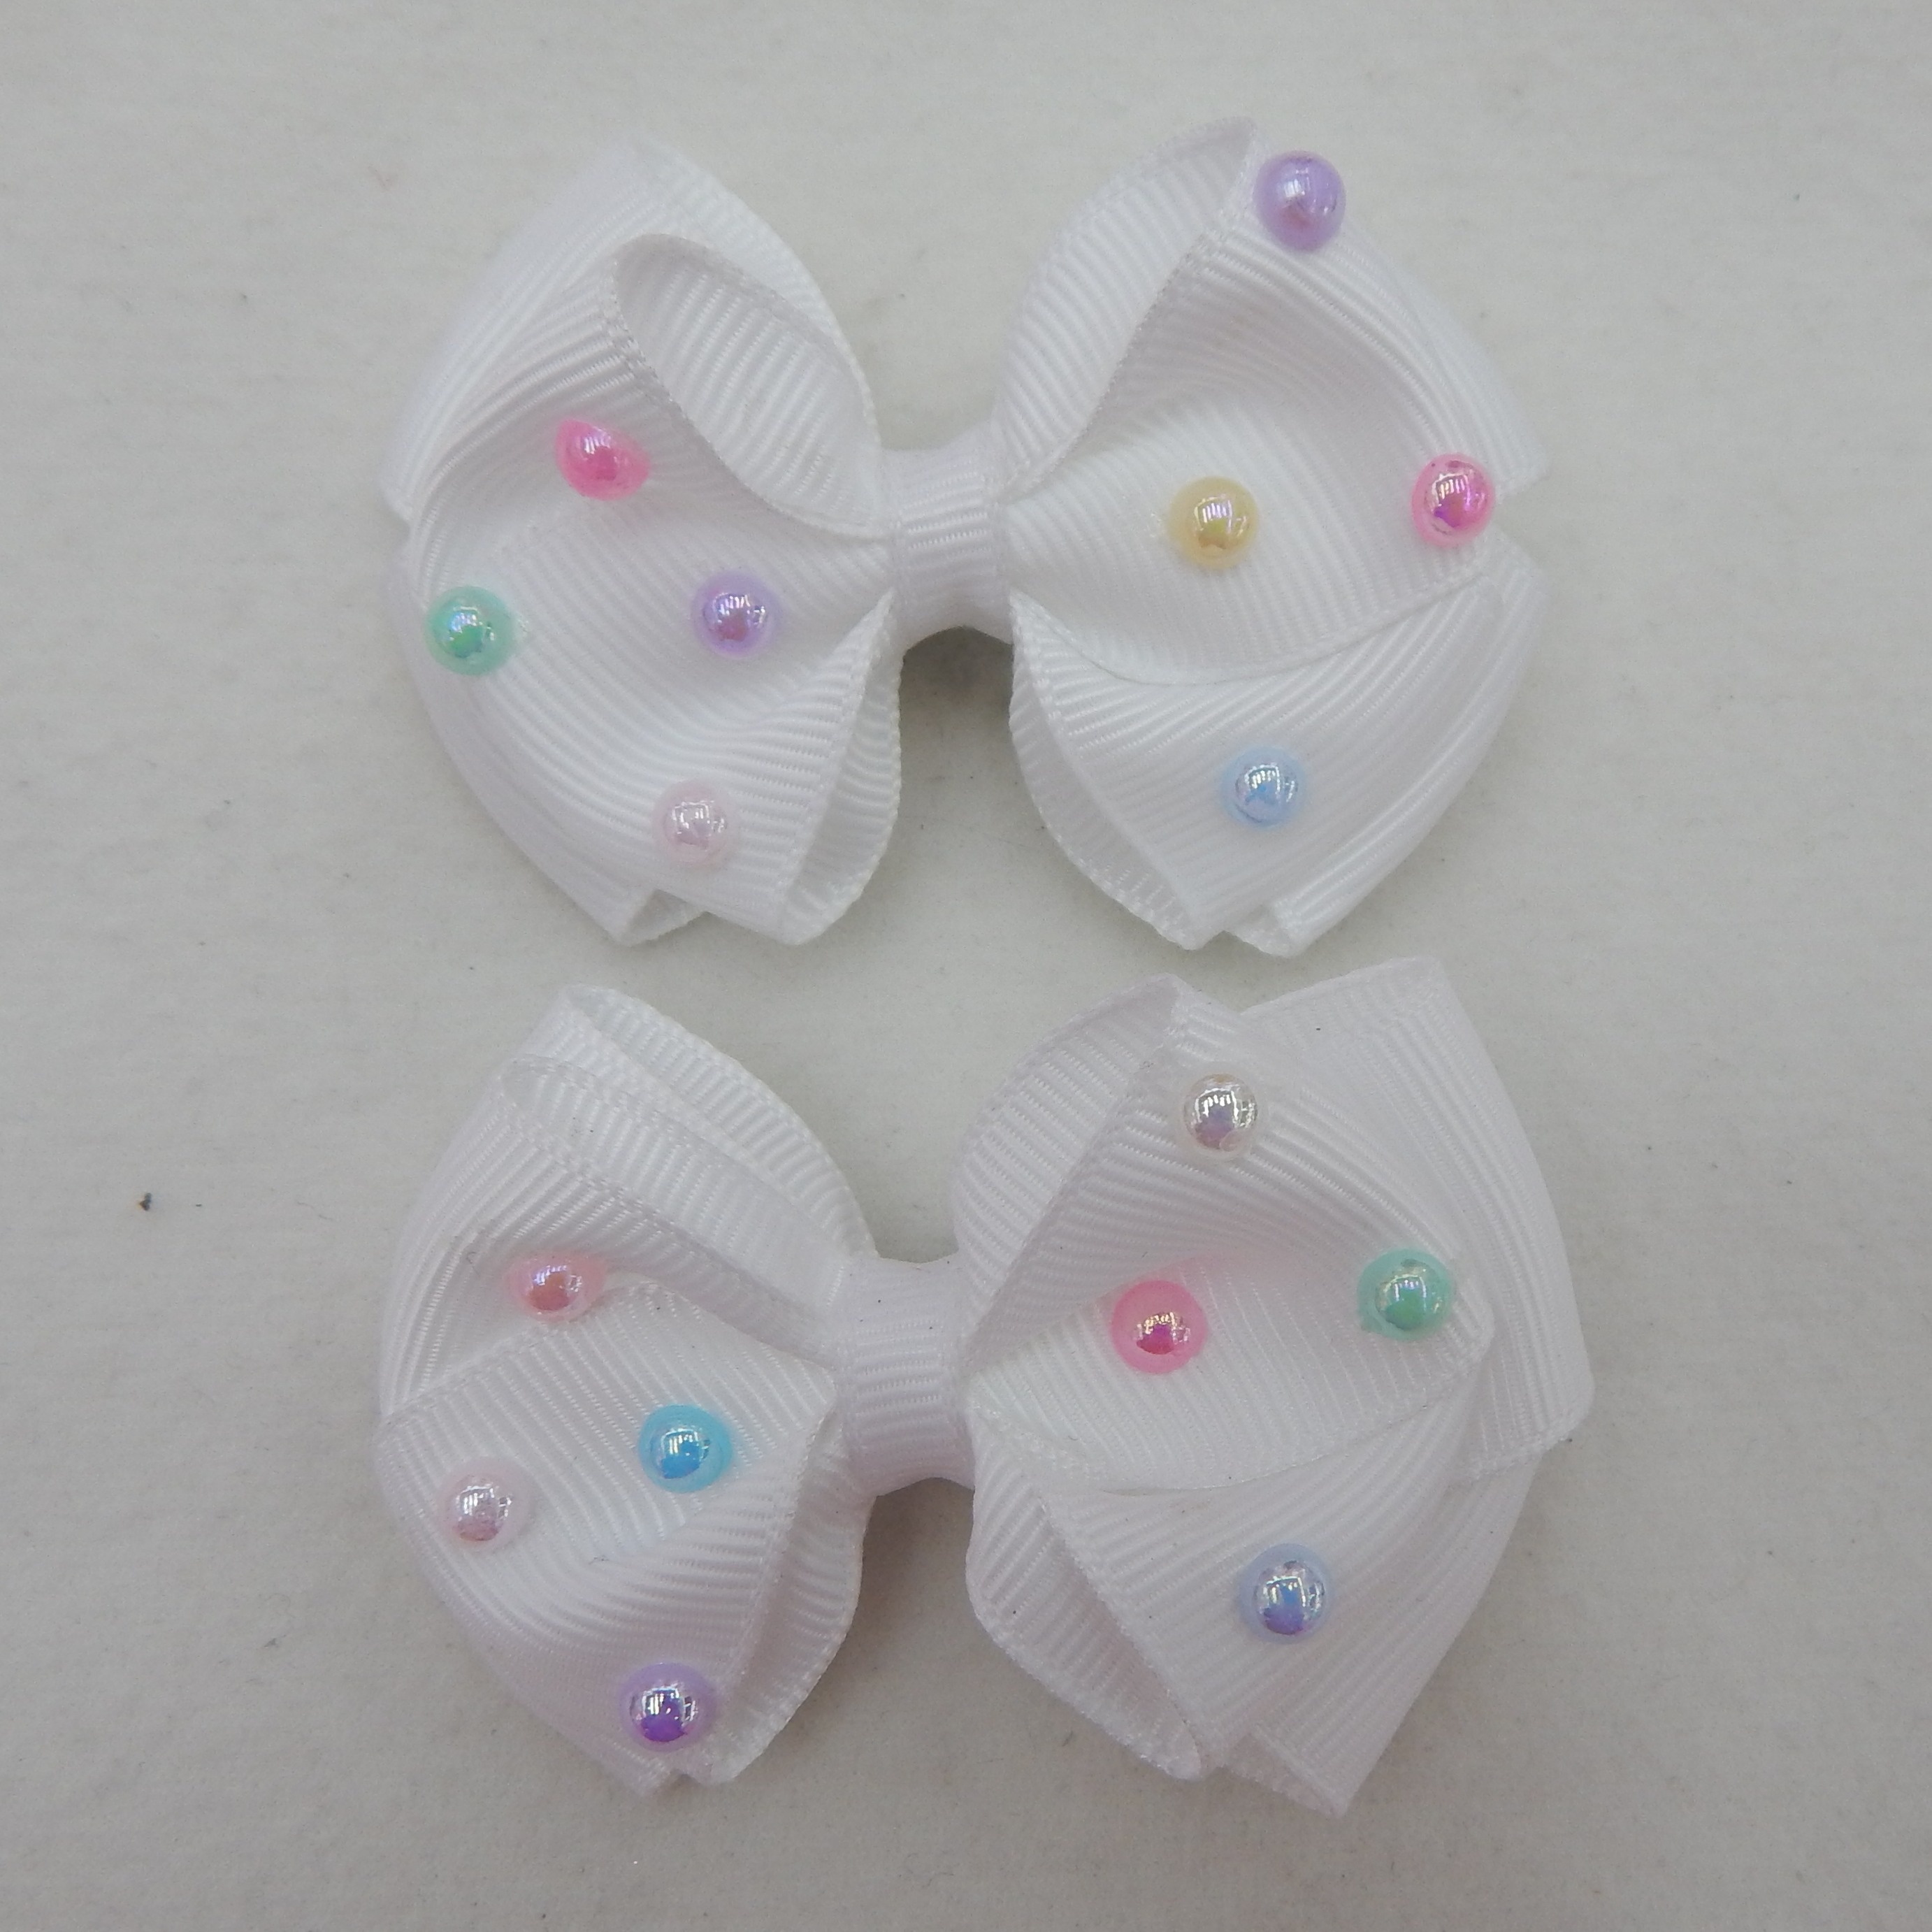 Bow hair pin for kids, girls. Trendy hair accessories for women